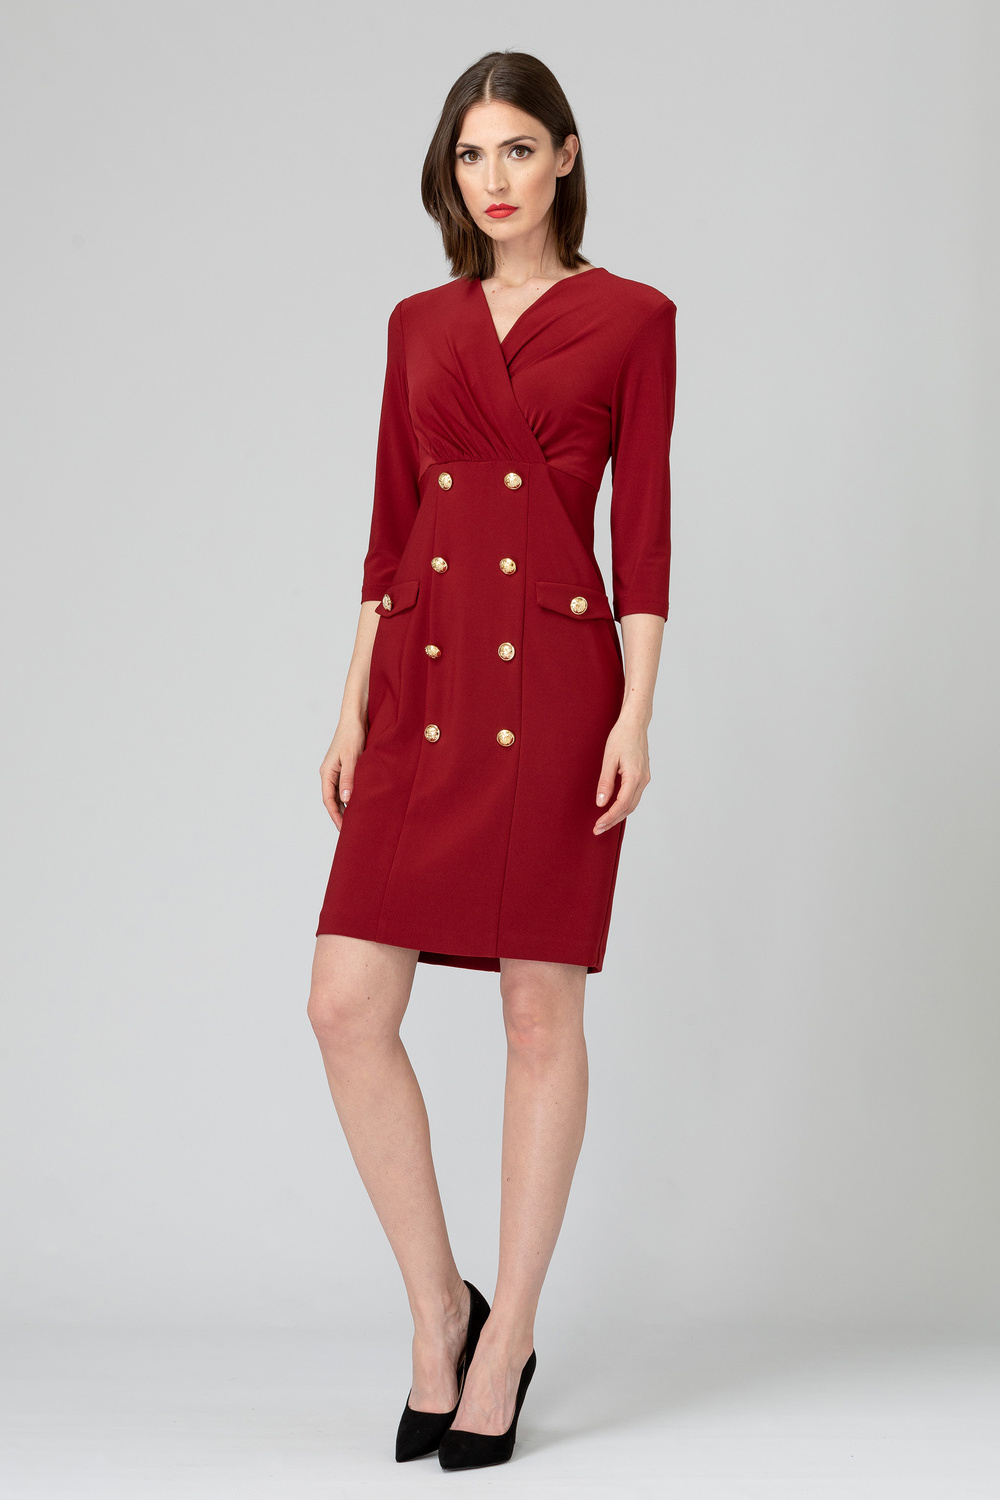 Joseph Ribkoff robe style 193014. Rouge Impérial 193